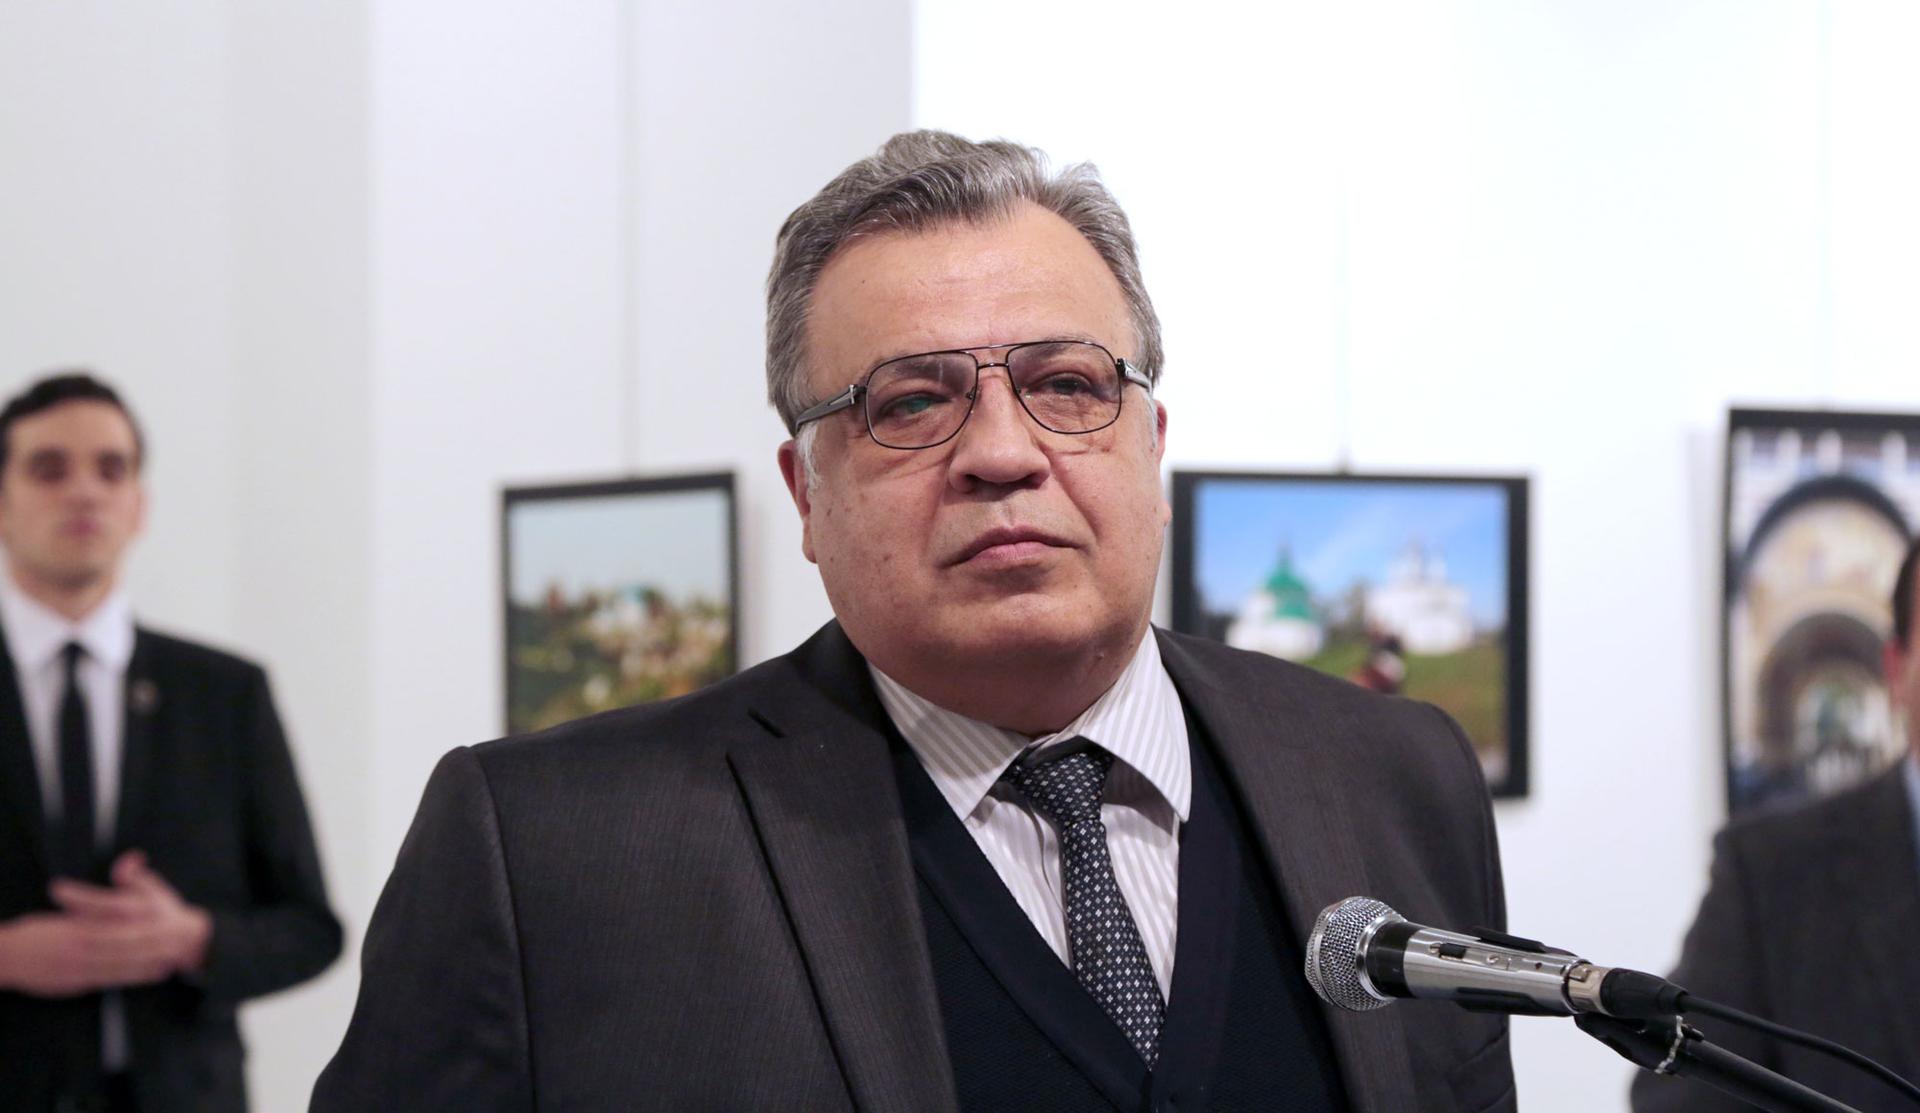 Andrei Karlov, the Russian Ambassador to Turkey, pauses during a speech at a photo exhibition in Ankara on Dec. 19, 2016, moments before a gunman opened fire on him.